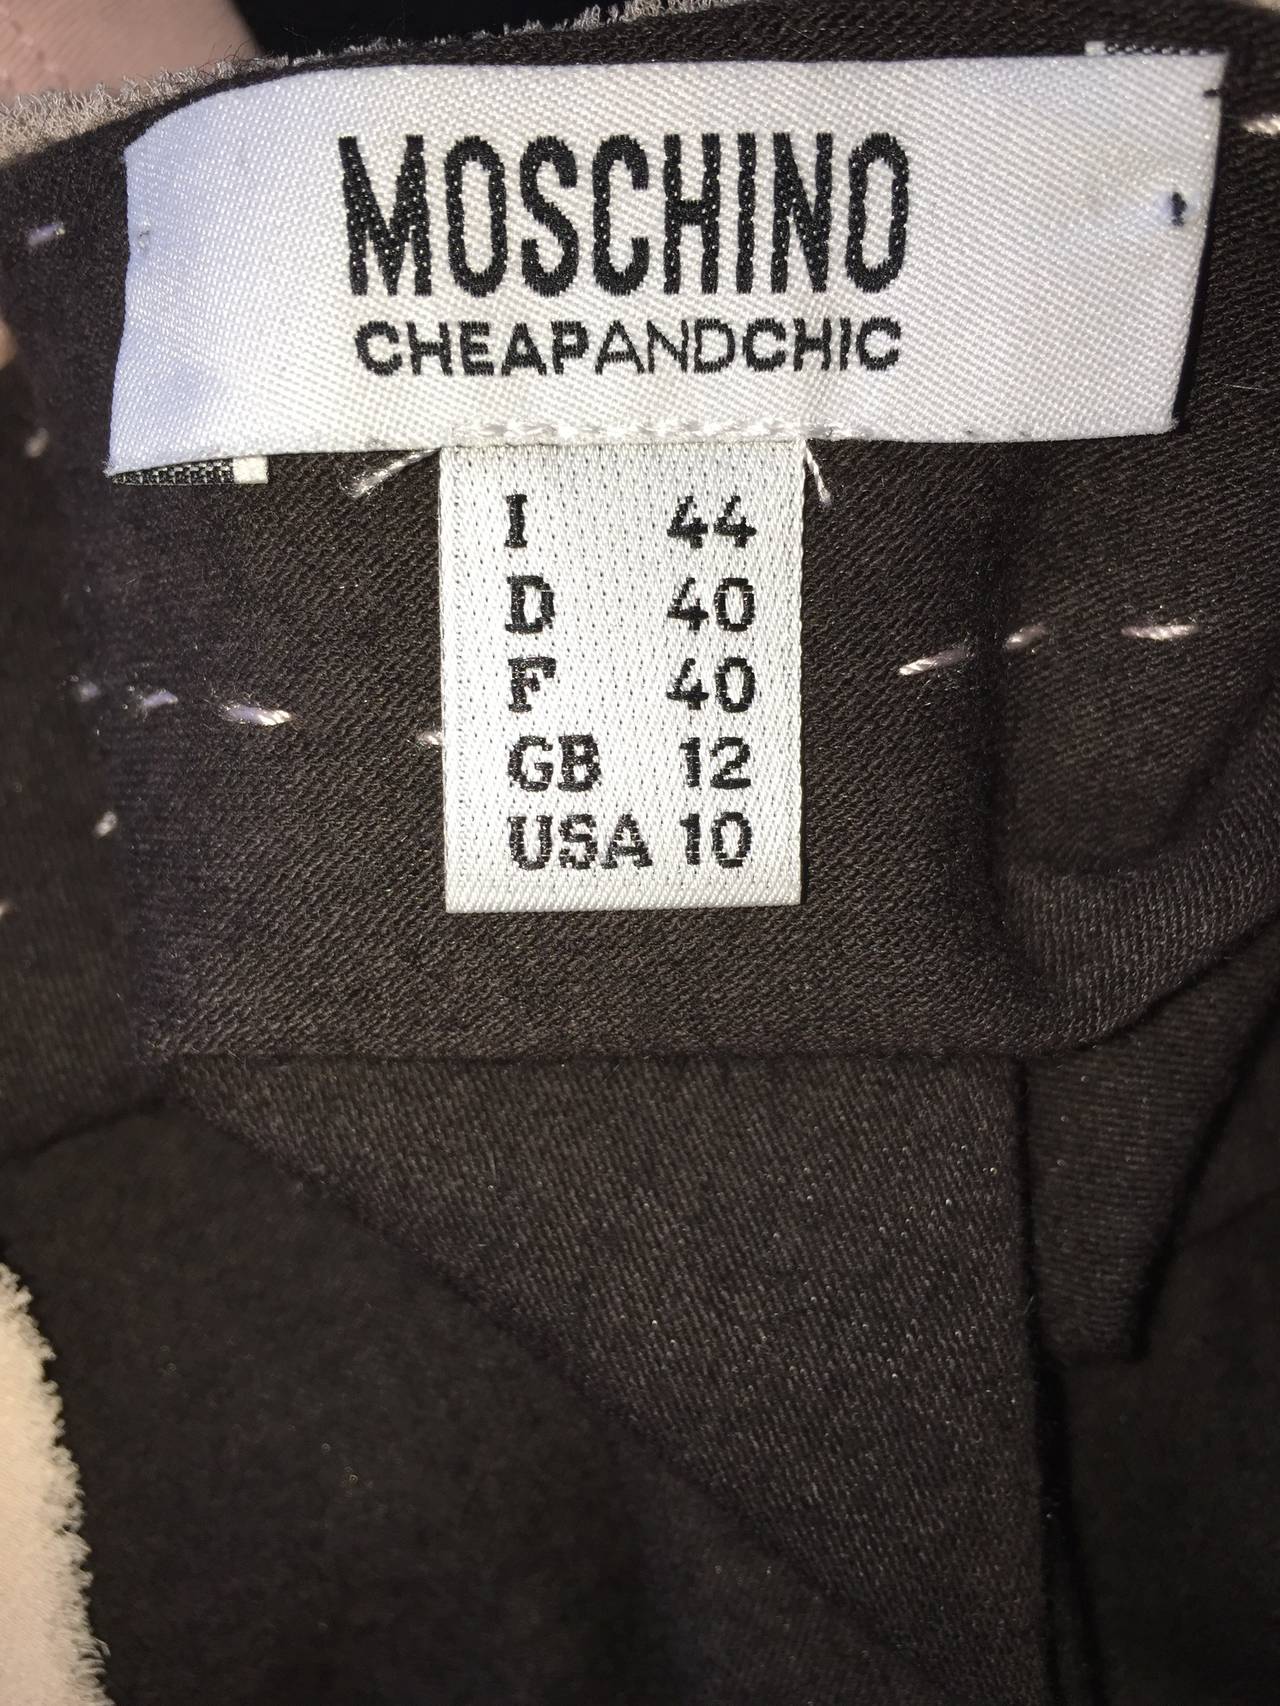 Moschino Cheap And Chic Brown + Pink Wool & Cotton Sweater Top w/  Bow 1